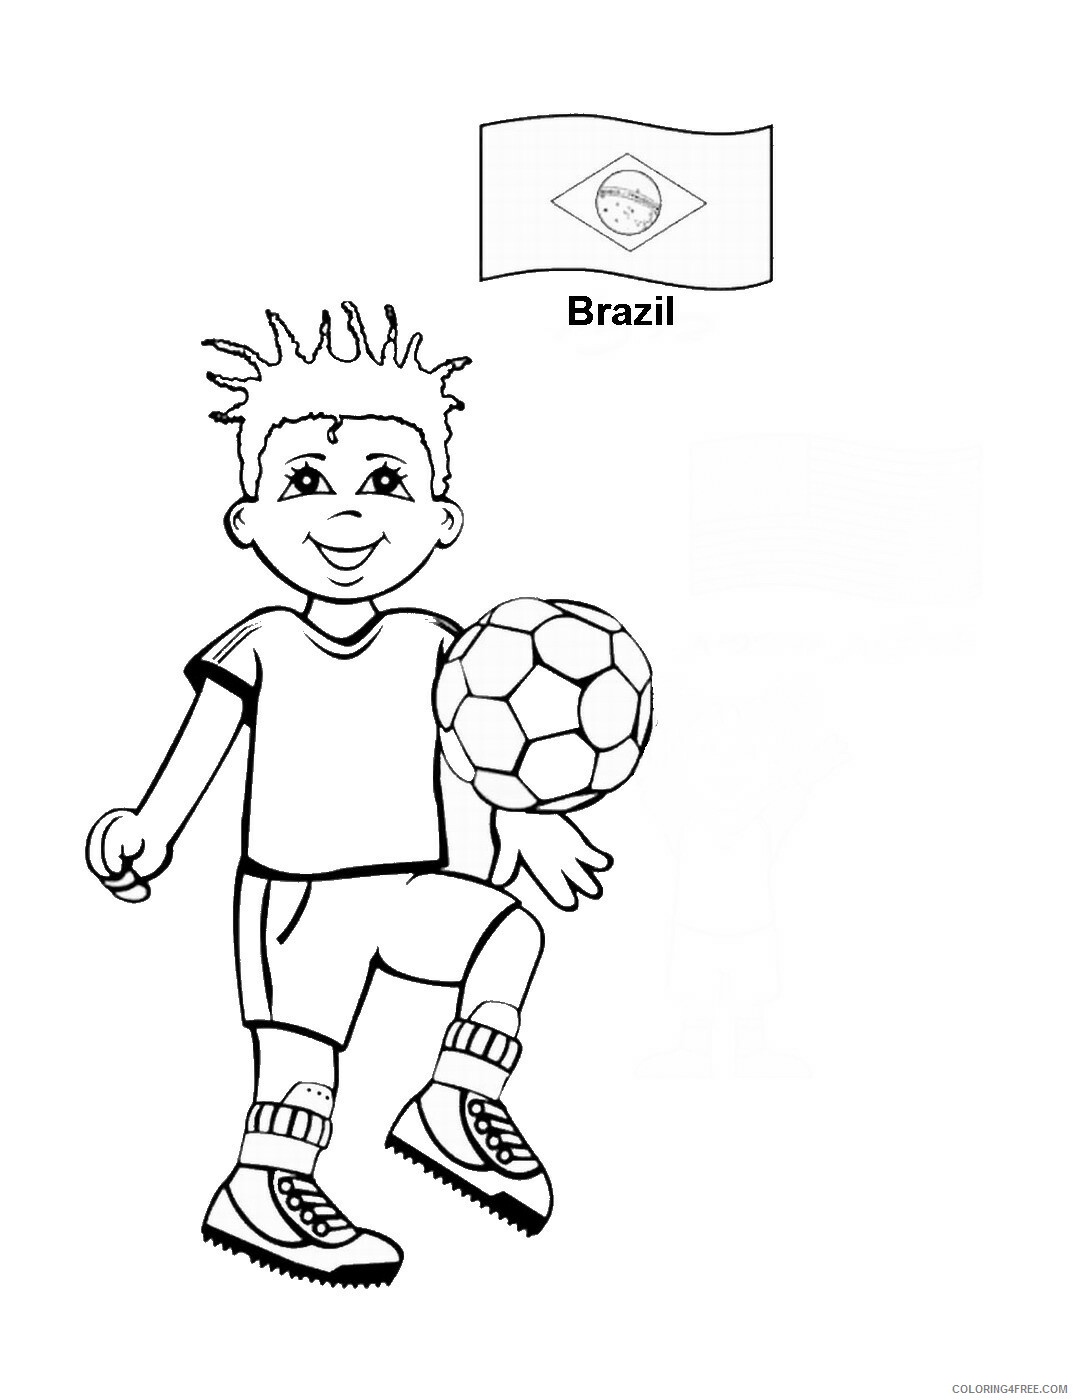 Around the World Coloring Pages brazil Printable 2021 0311 Coloring4free